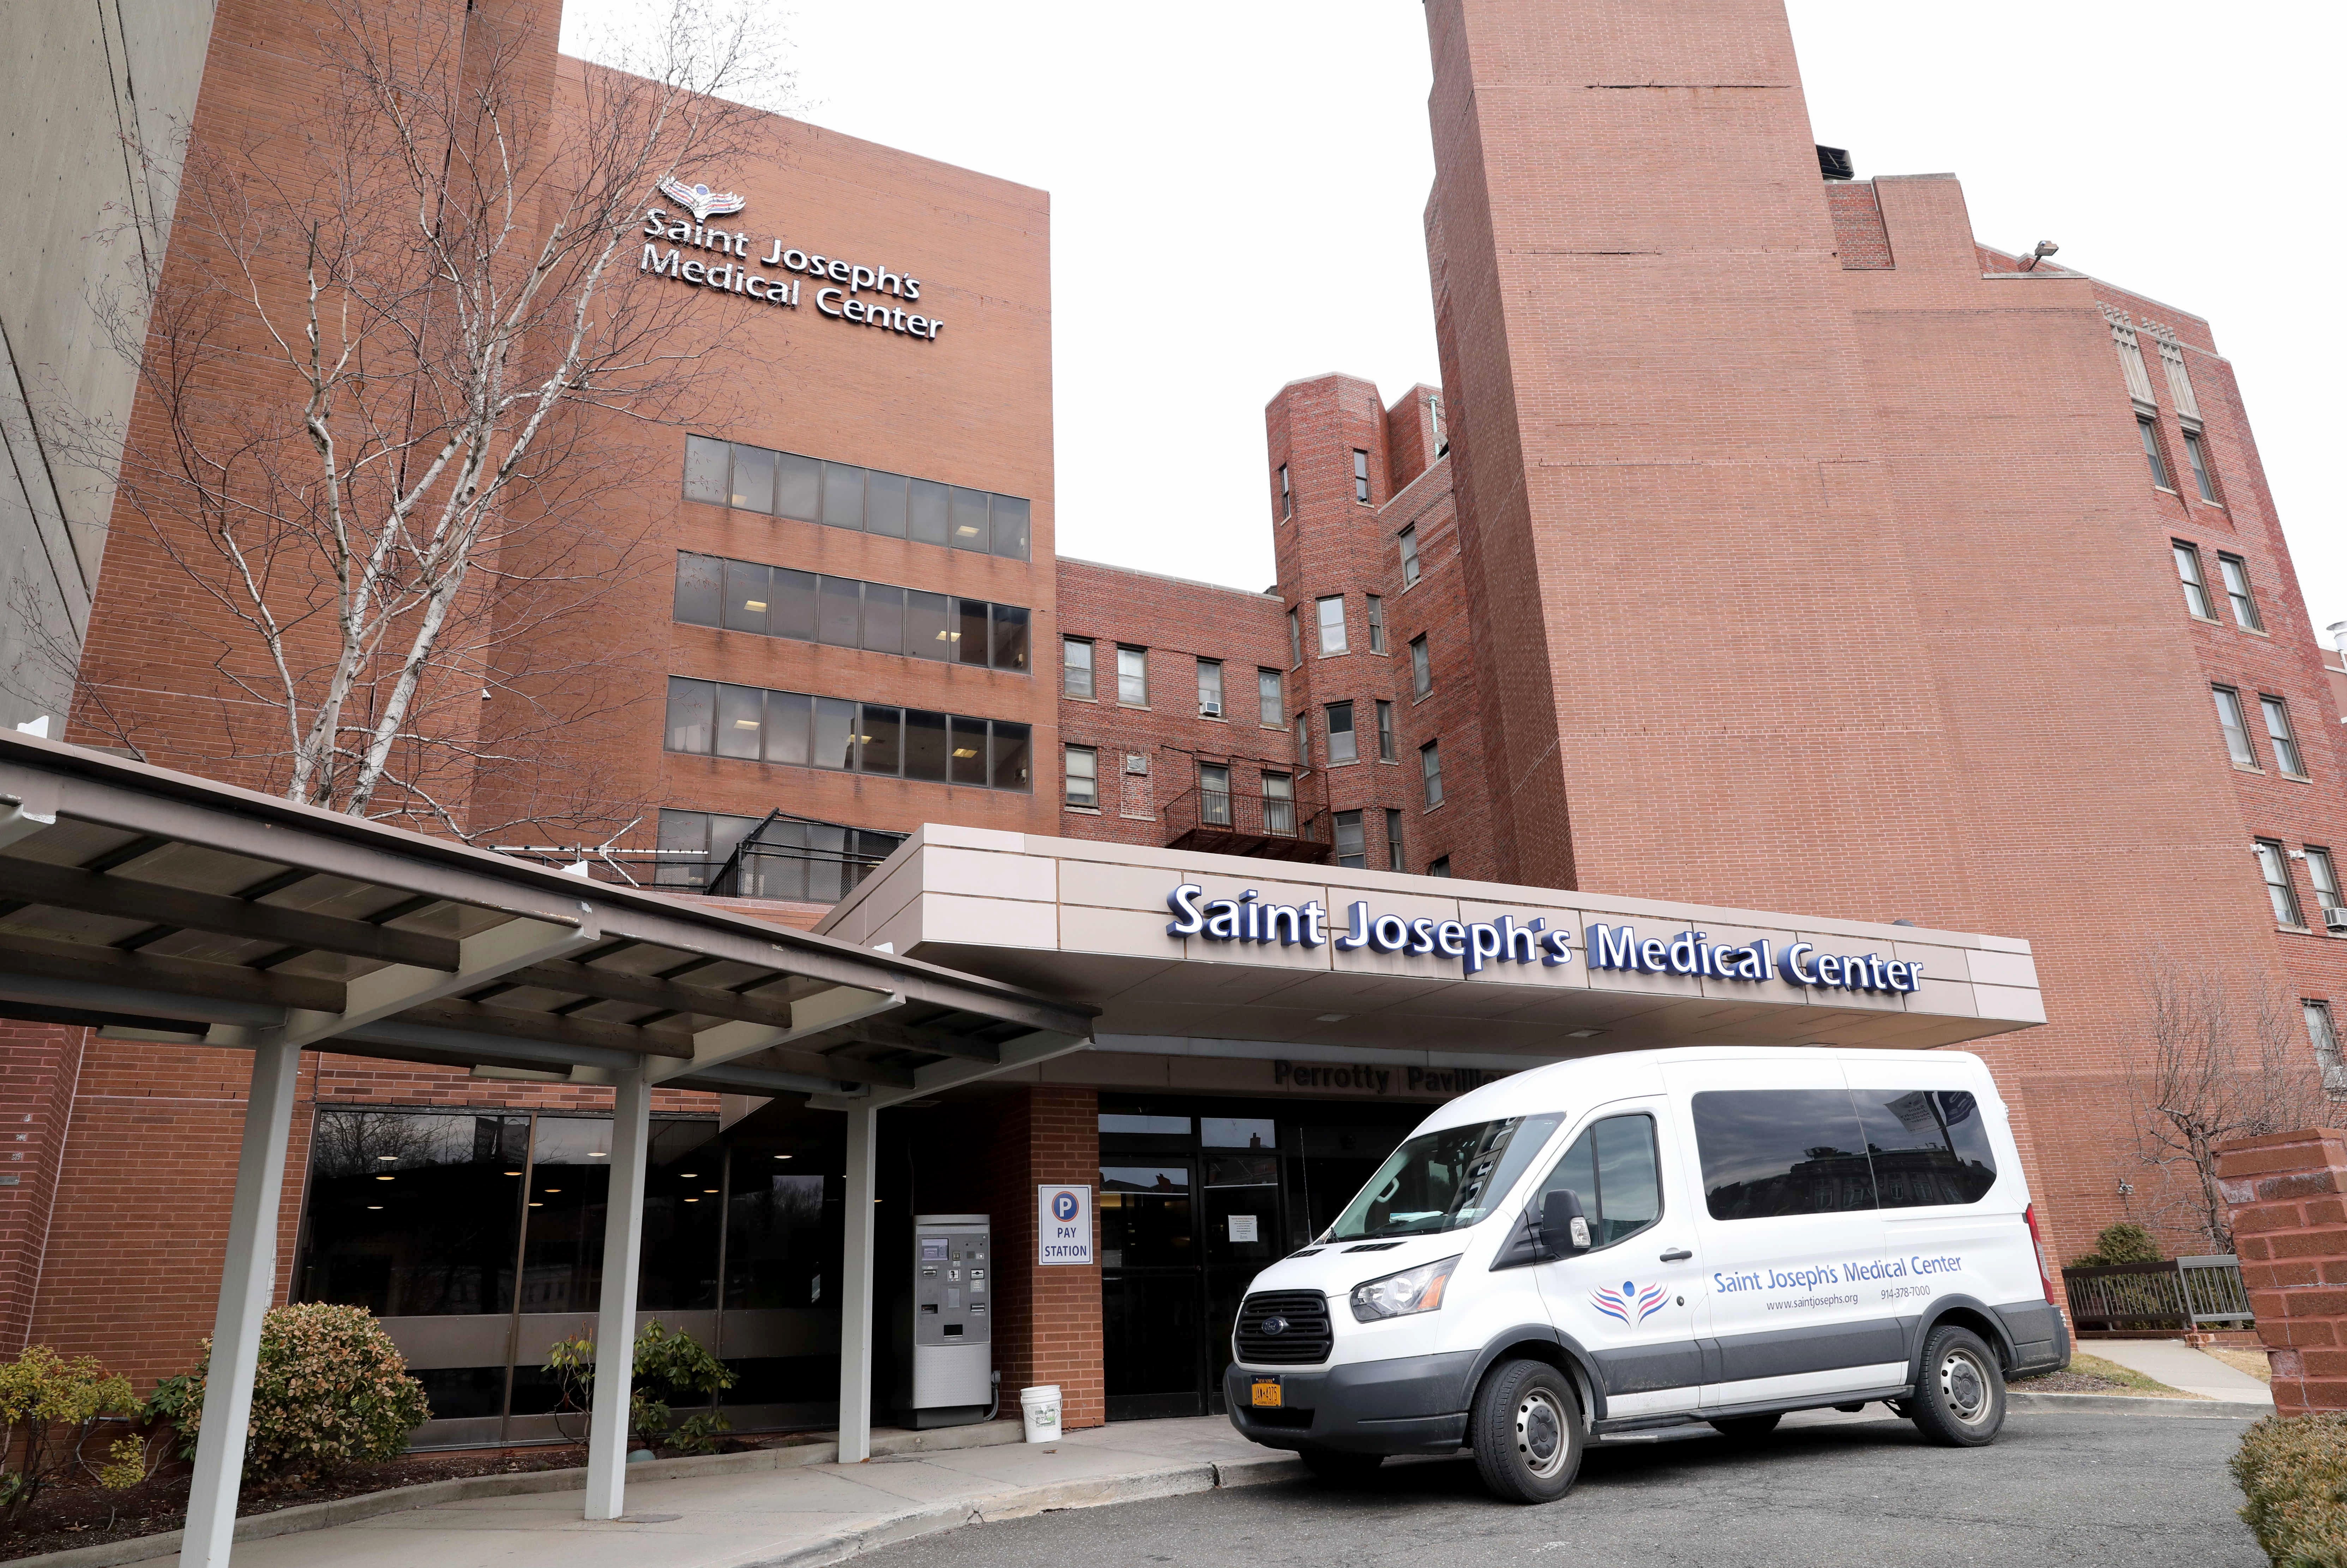 The exterior of Saint Joseph's Medical Center in Yonkers, photographed Feb. 24, 2022. The facility among 15 hospitals in New York that faced a combined $54,000 in fines connected to at least 50 patient-restraint violations since 2015.